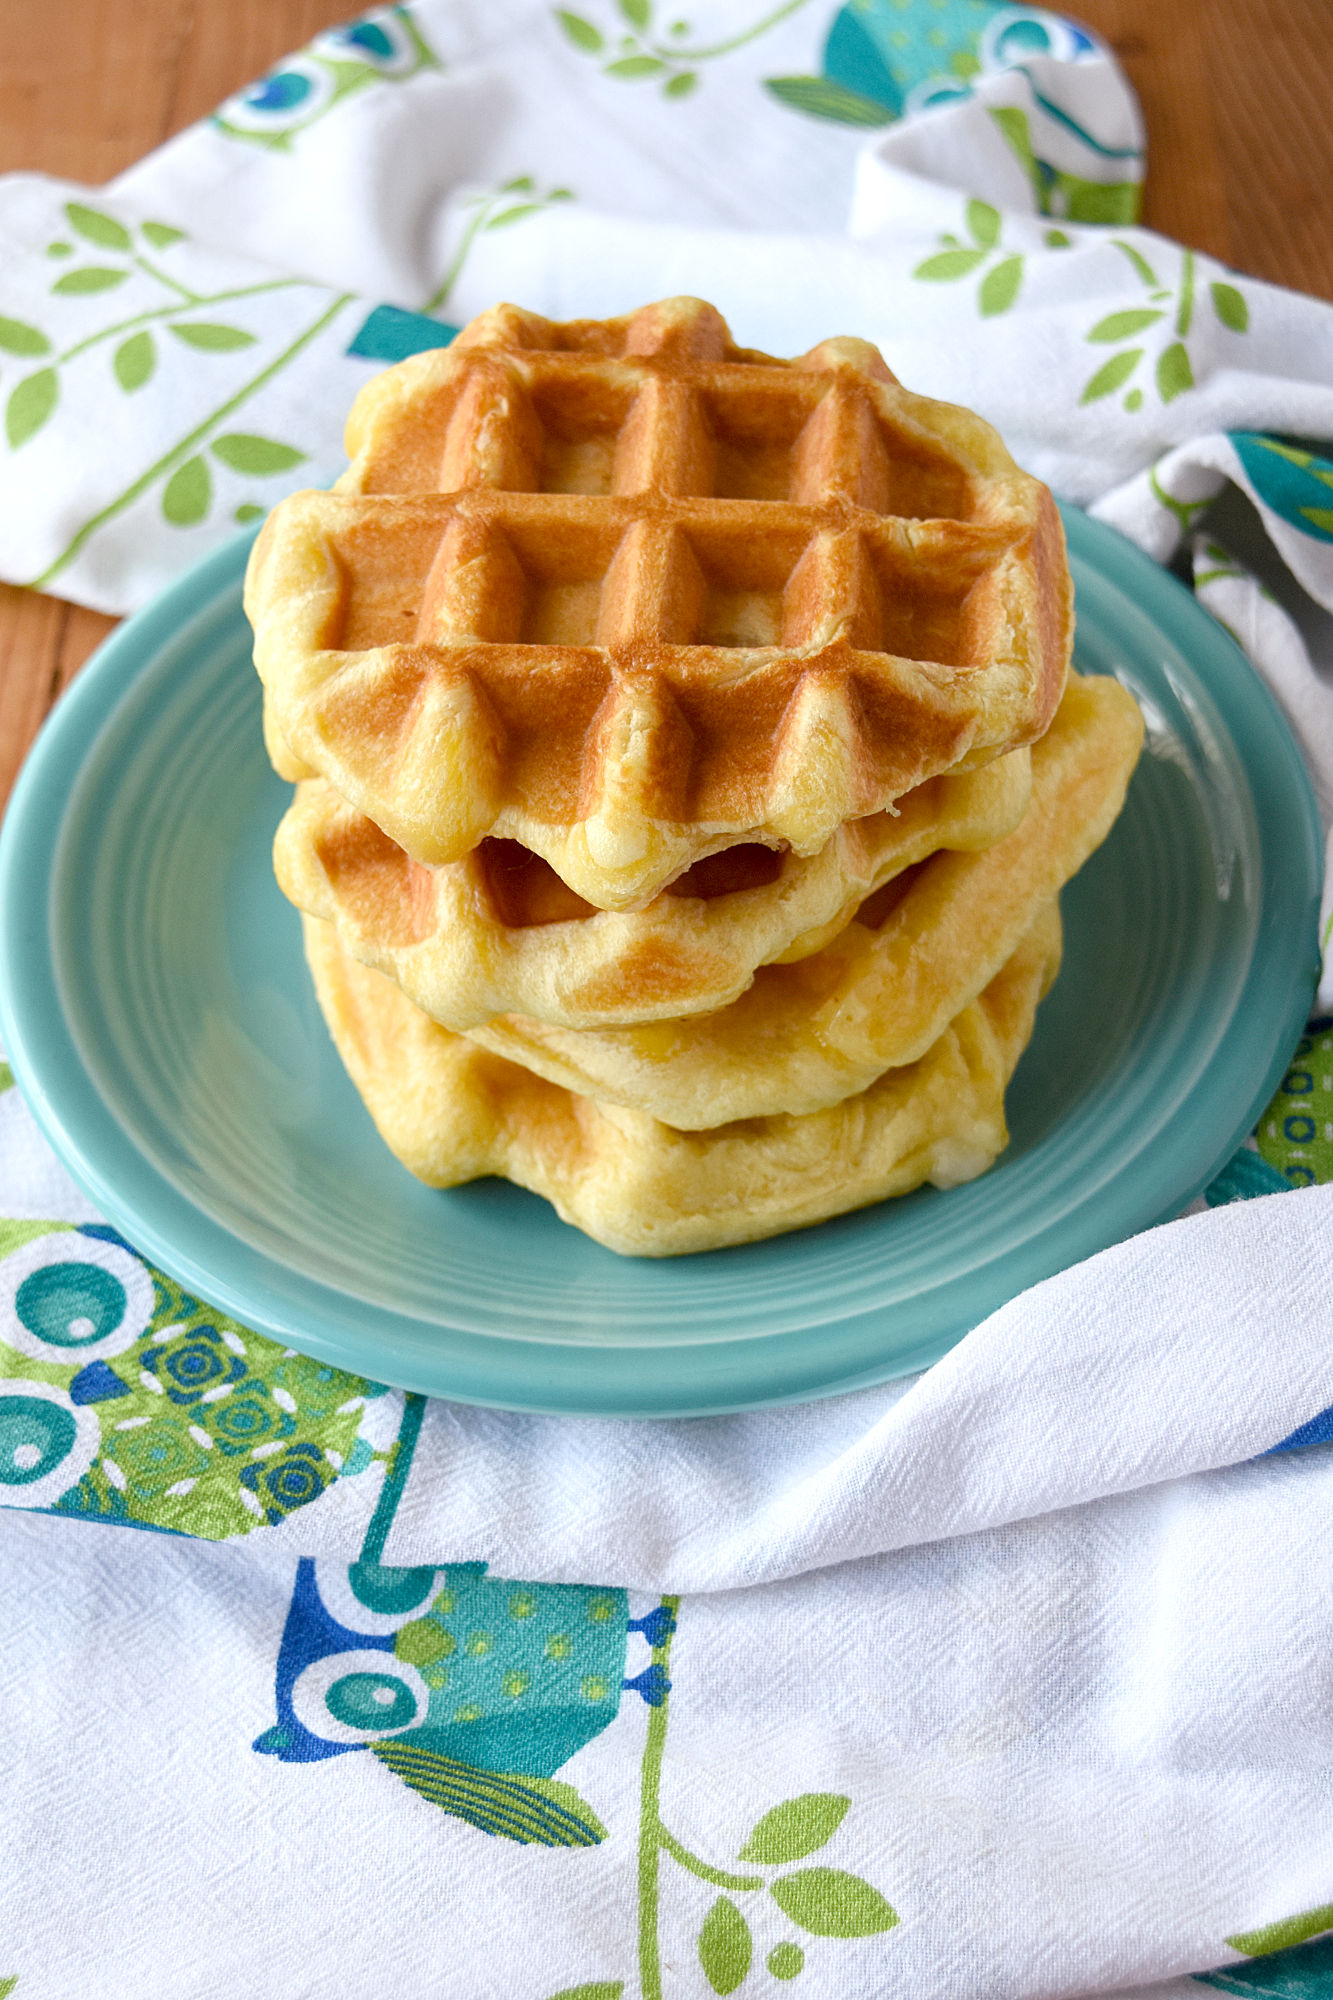 Waffle Biscuit Monte Cristo has only three ingredients and are easy for kids to make themselves. With simple ingredients and an easy technique, kids can make these for a snack or lunch any time they want.  #OurFamilyTable